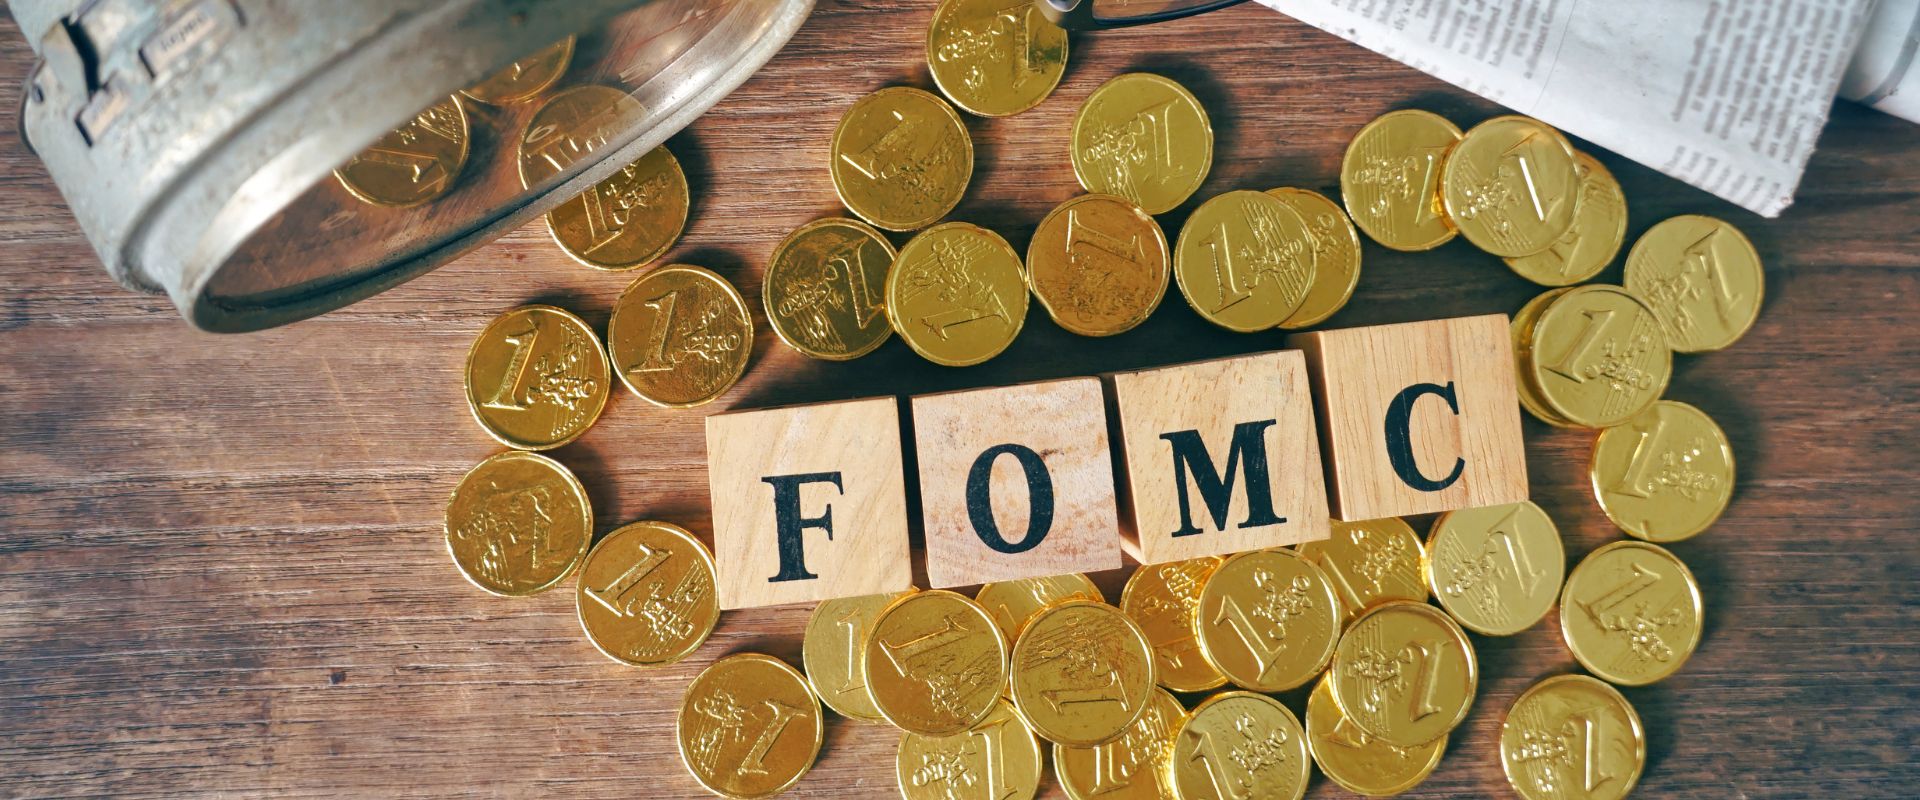 fomc text on blocks surrounded by gold coins